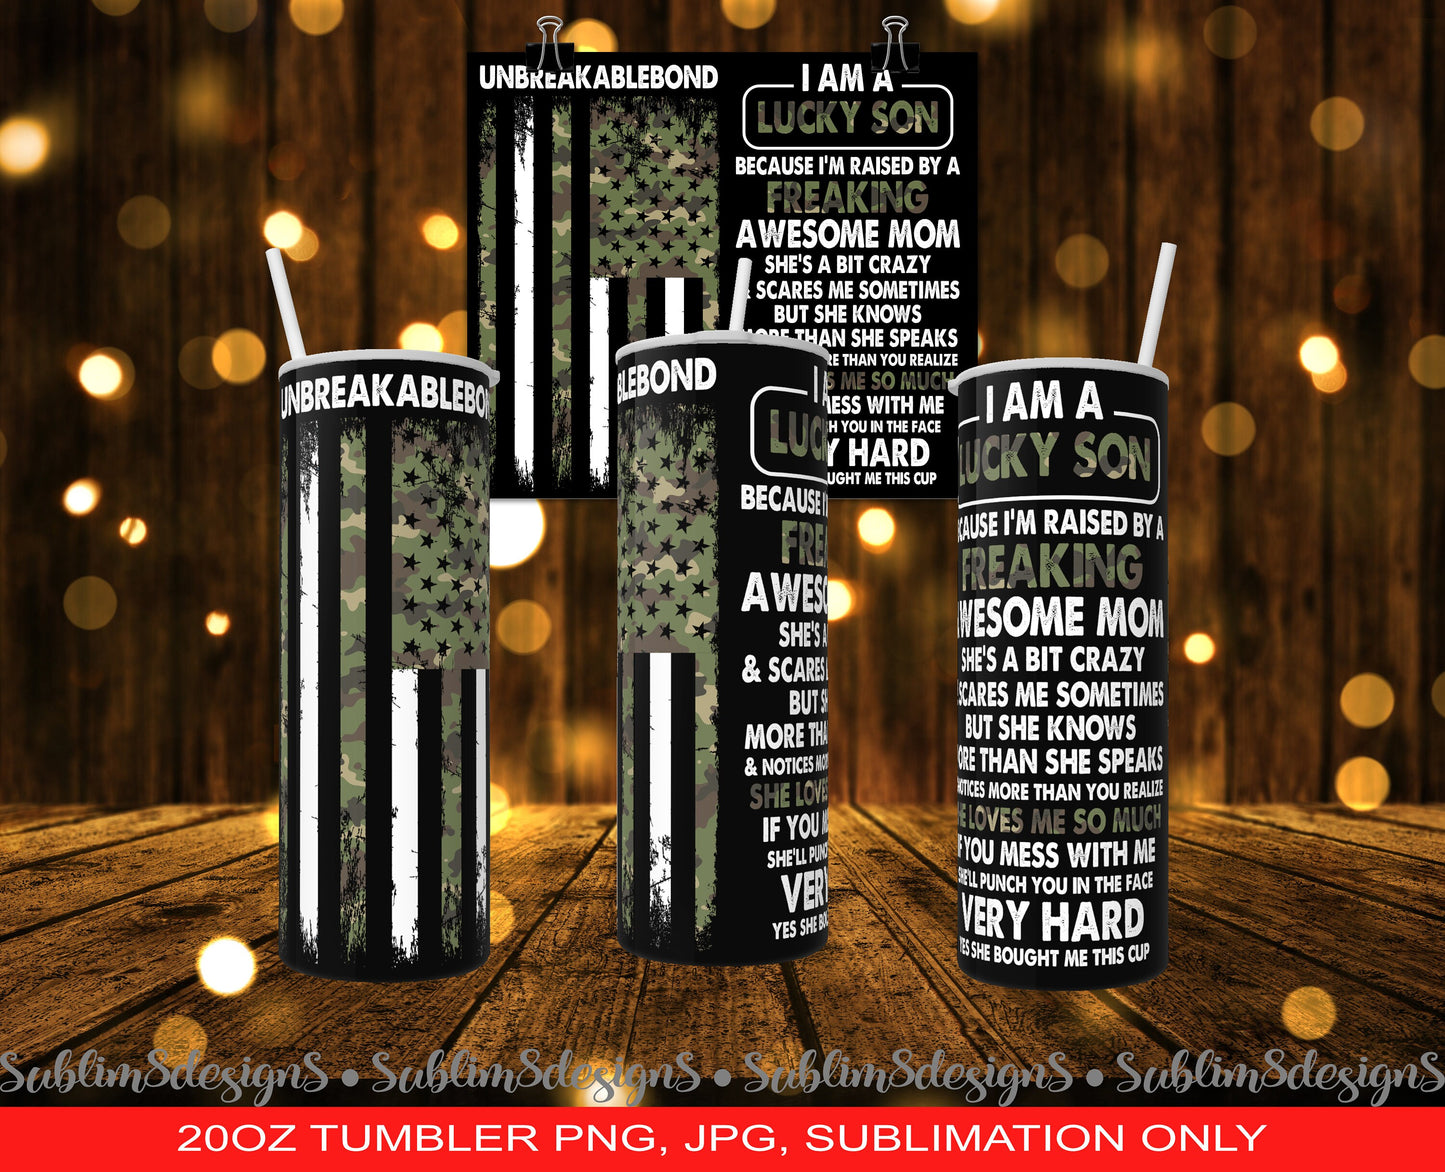 I Am A Lucky Son 20oz Tumbler PNG and JPG ONLY